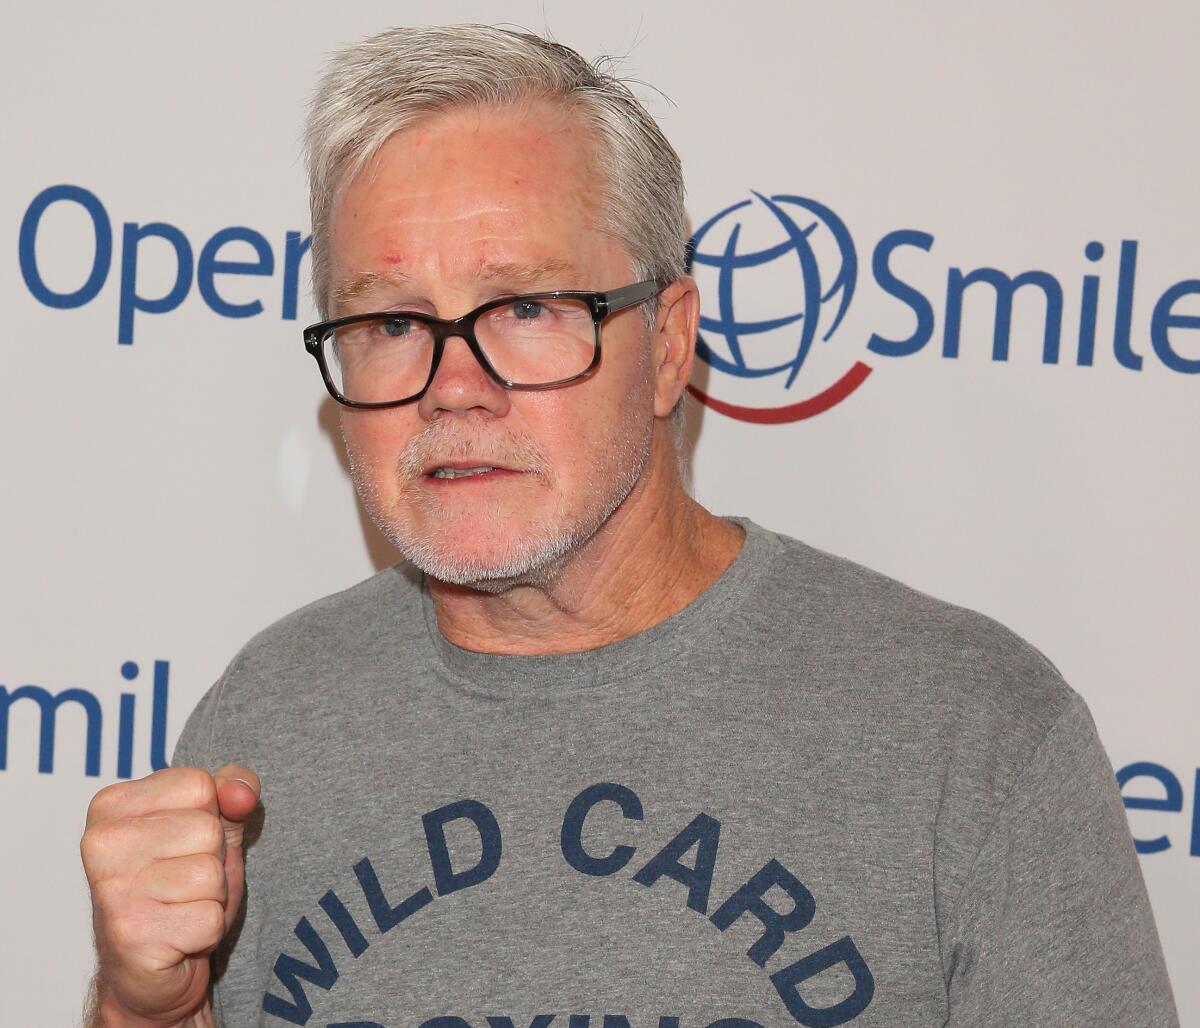 Freddie Roach agreed to train Julio Cesar Chavez Jr. if he committed himself to training.